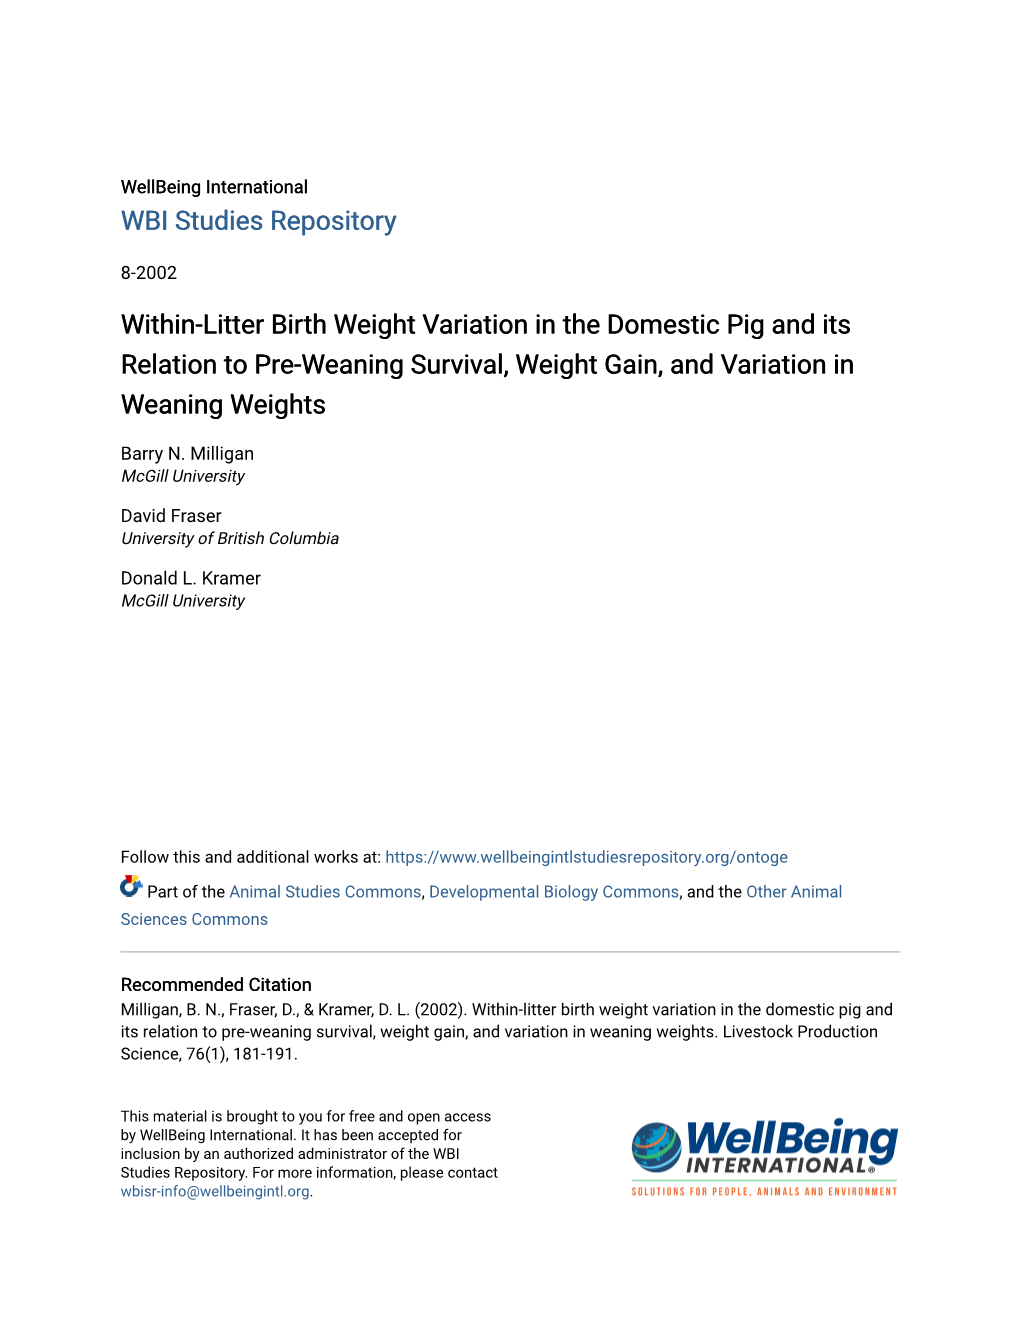 Within-Litter Birth Weight Variation in the Domestic Pig and Its Relation to Pre-Weaning Survival, Weight Gain, and Variation in Weaning Weights